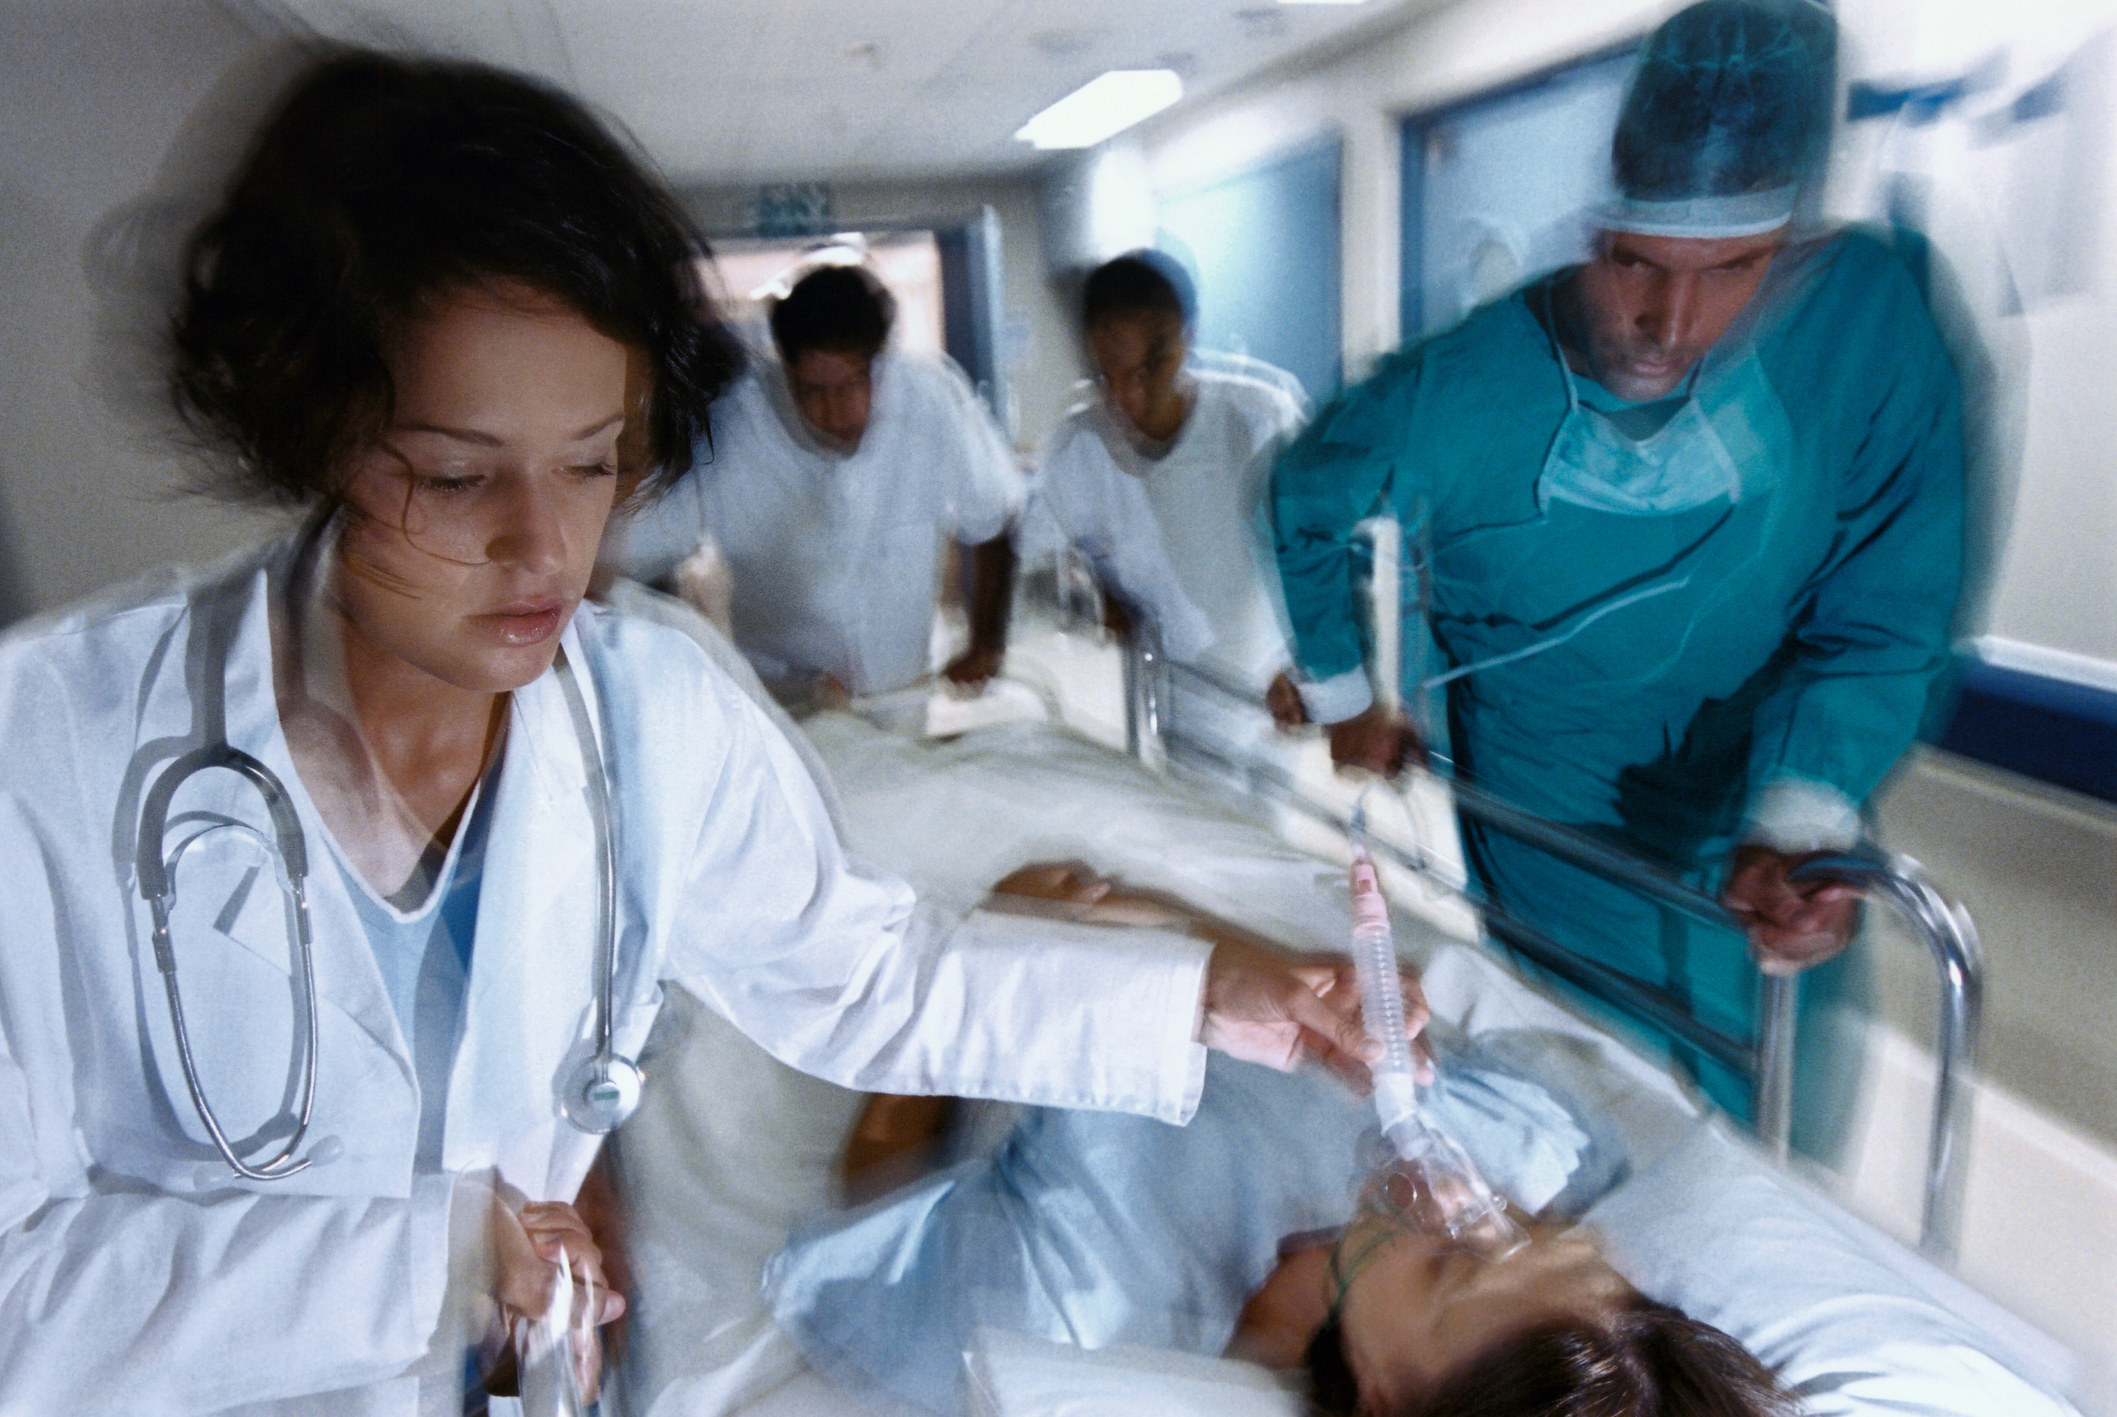 Hospital staff rushing a patient to operating room